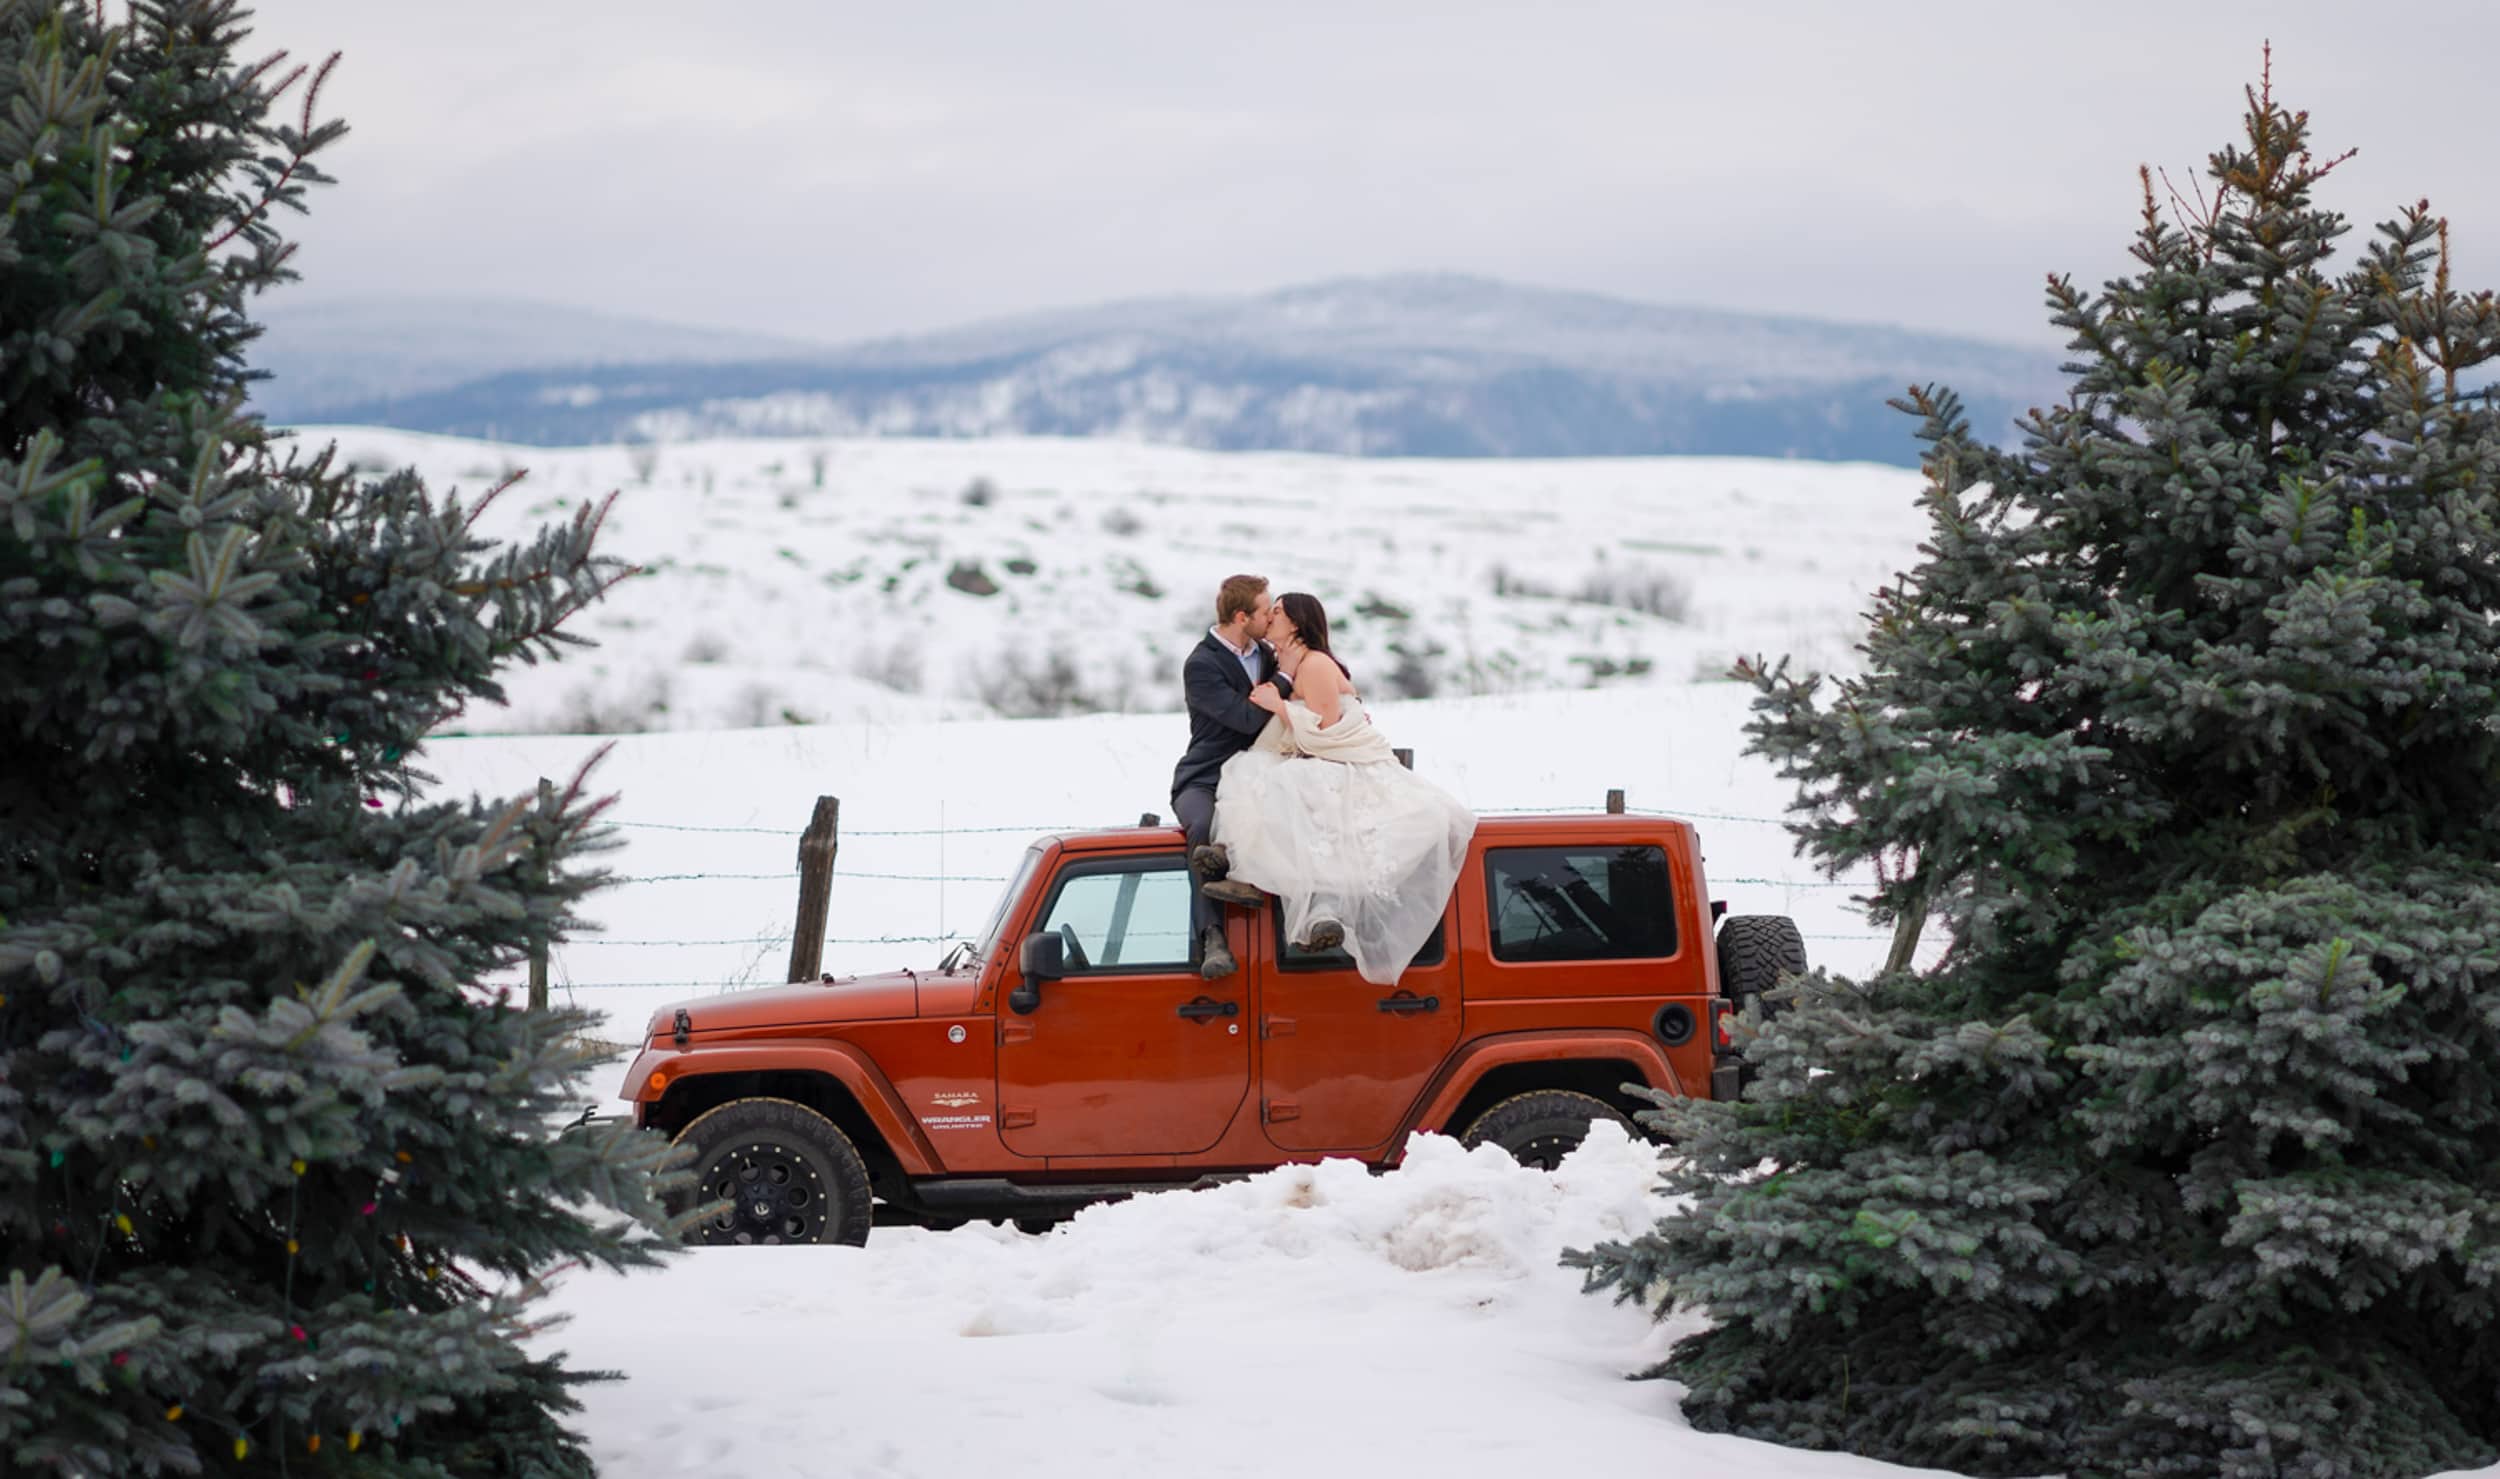 Vancouver Elopement and Destination wedding photographer - bride and groom on red Jeep